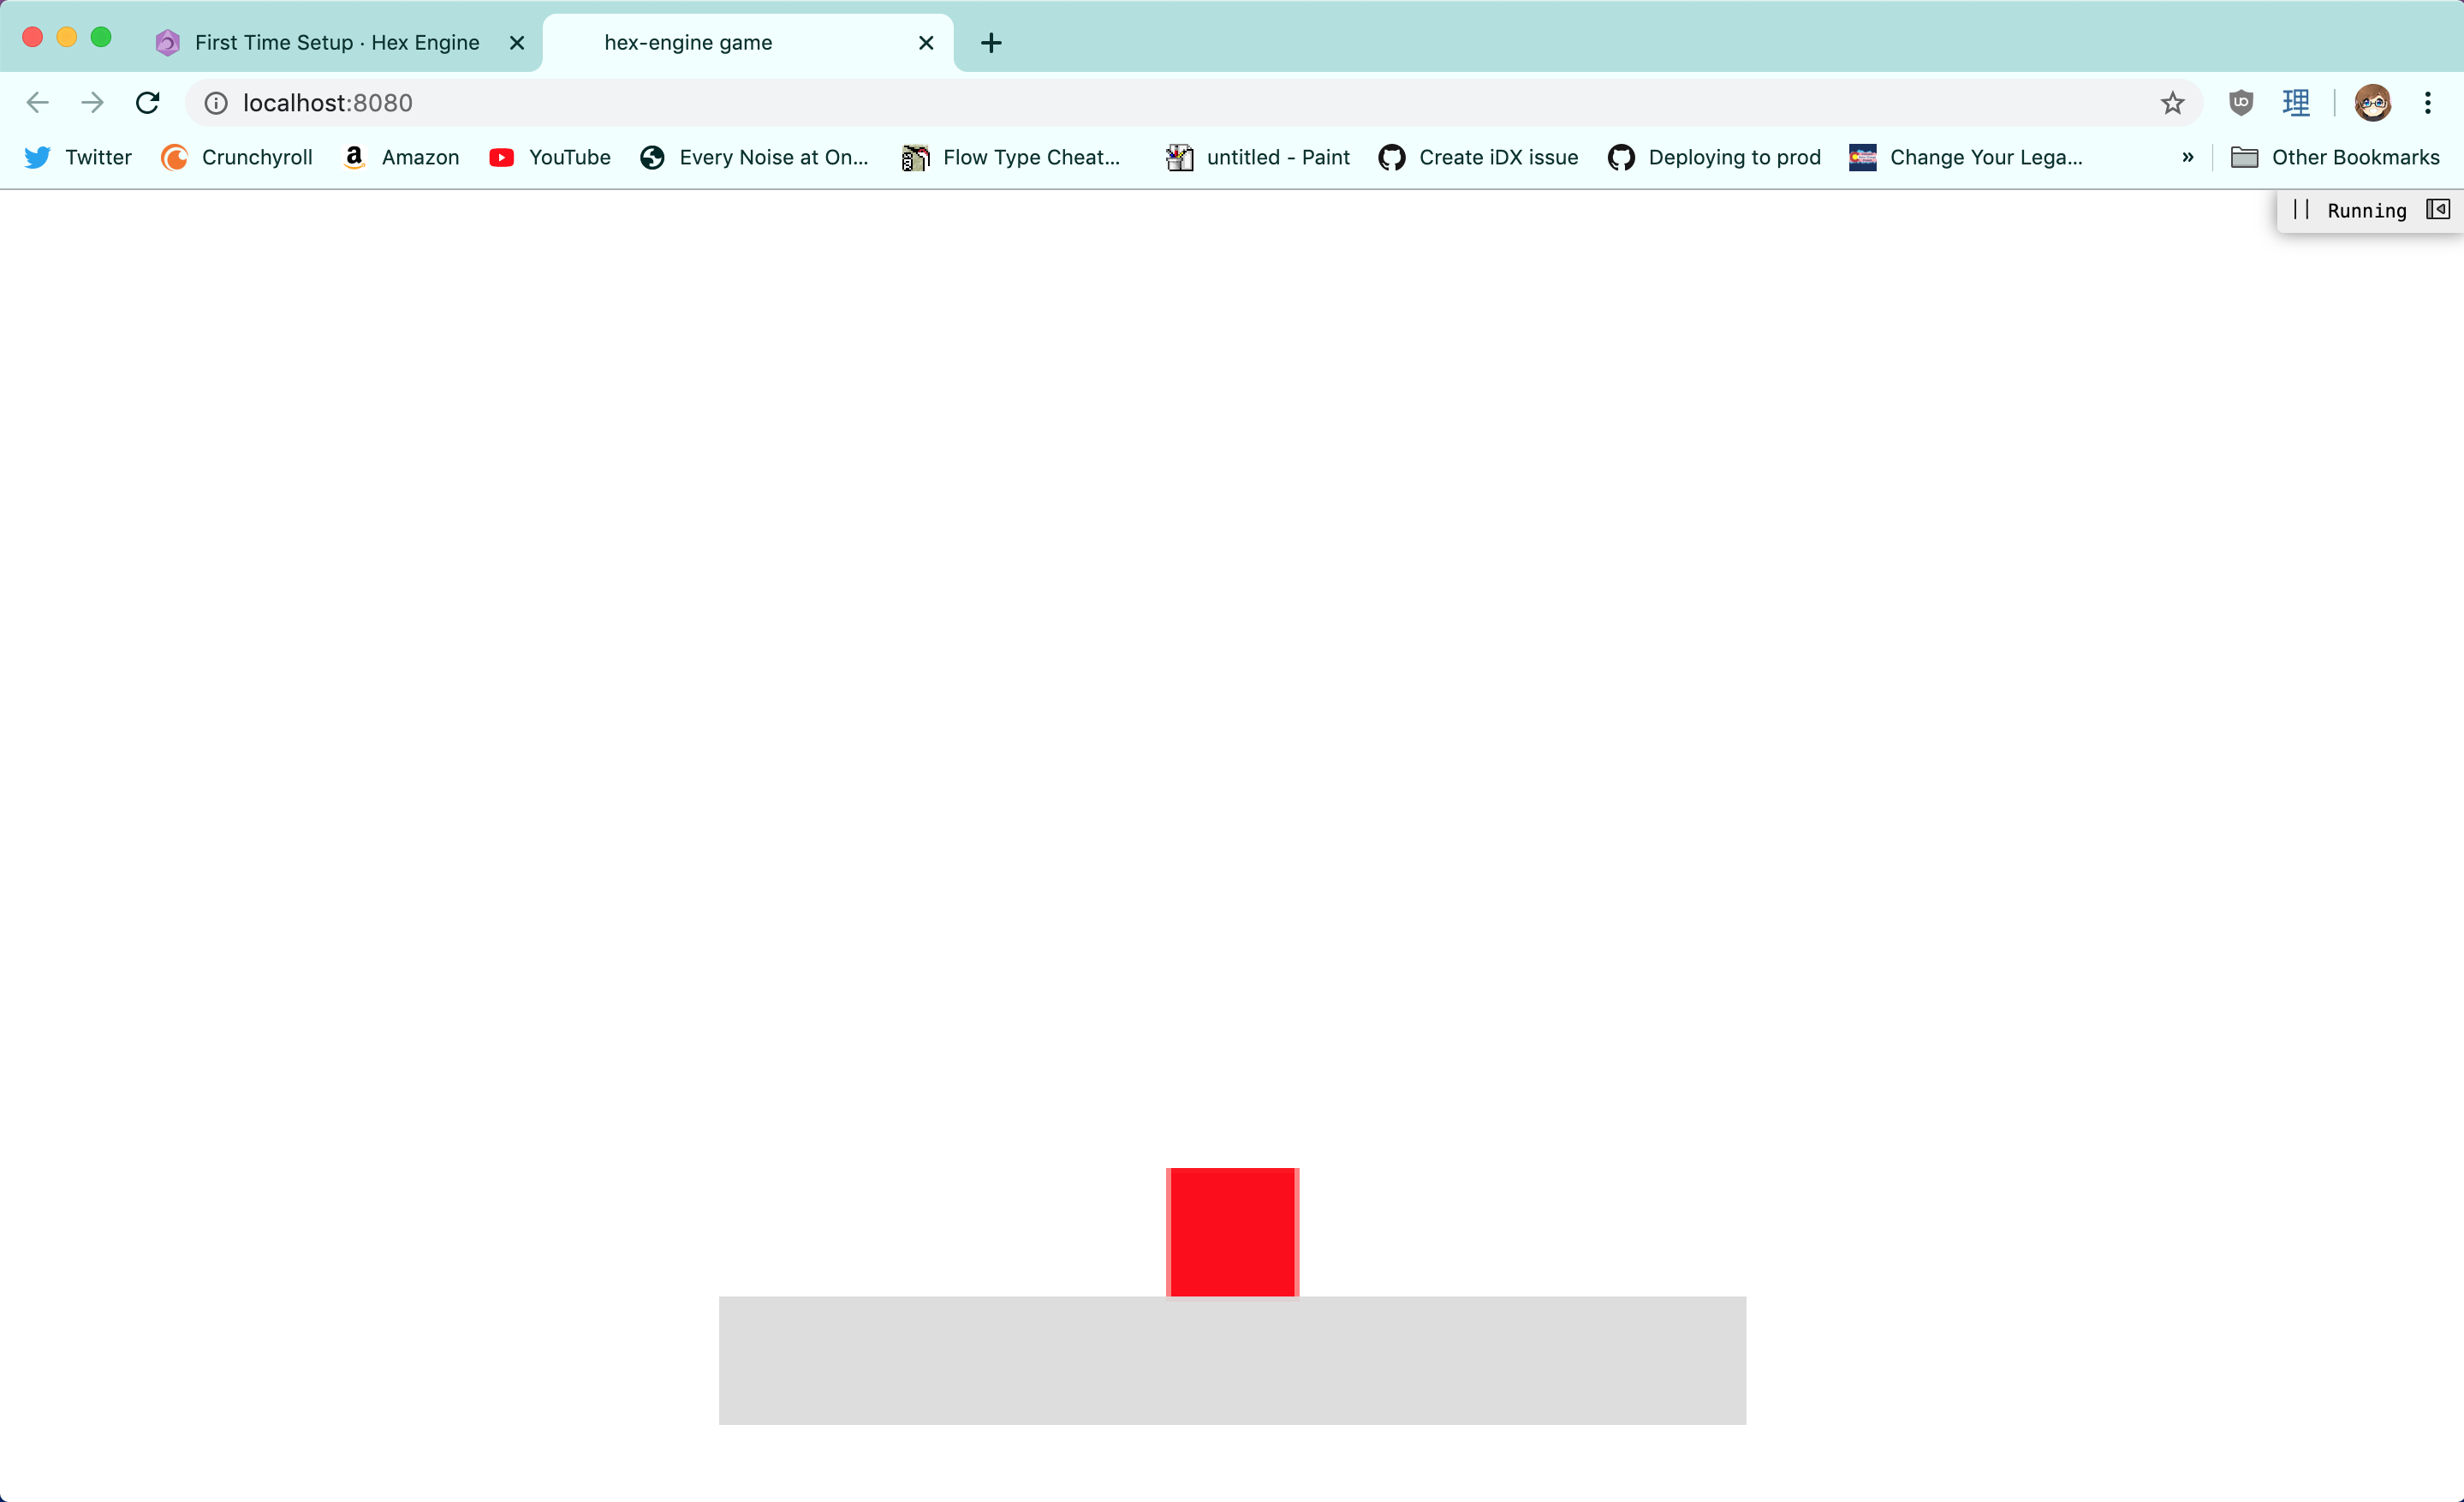 Screenshot of the default game created by create-hex-engine-game. A red box is sitting on a grey platform, set against a white background.